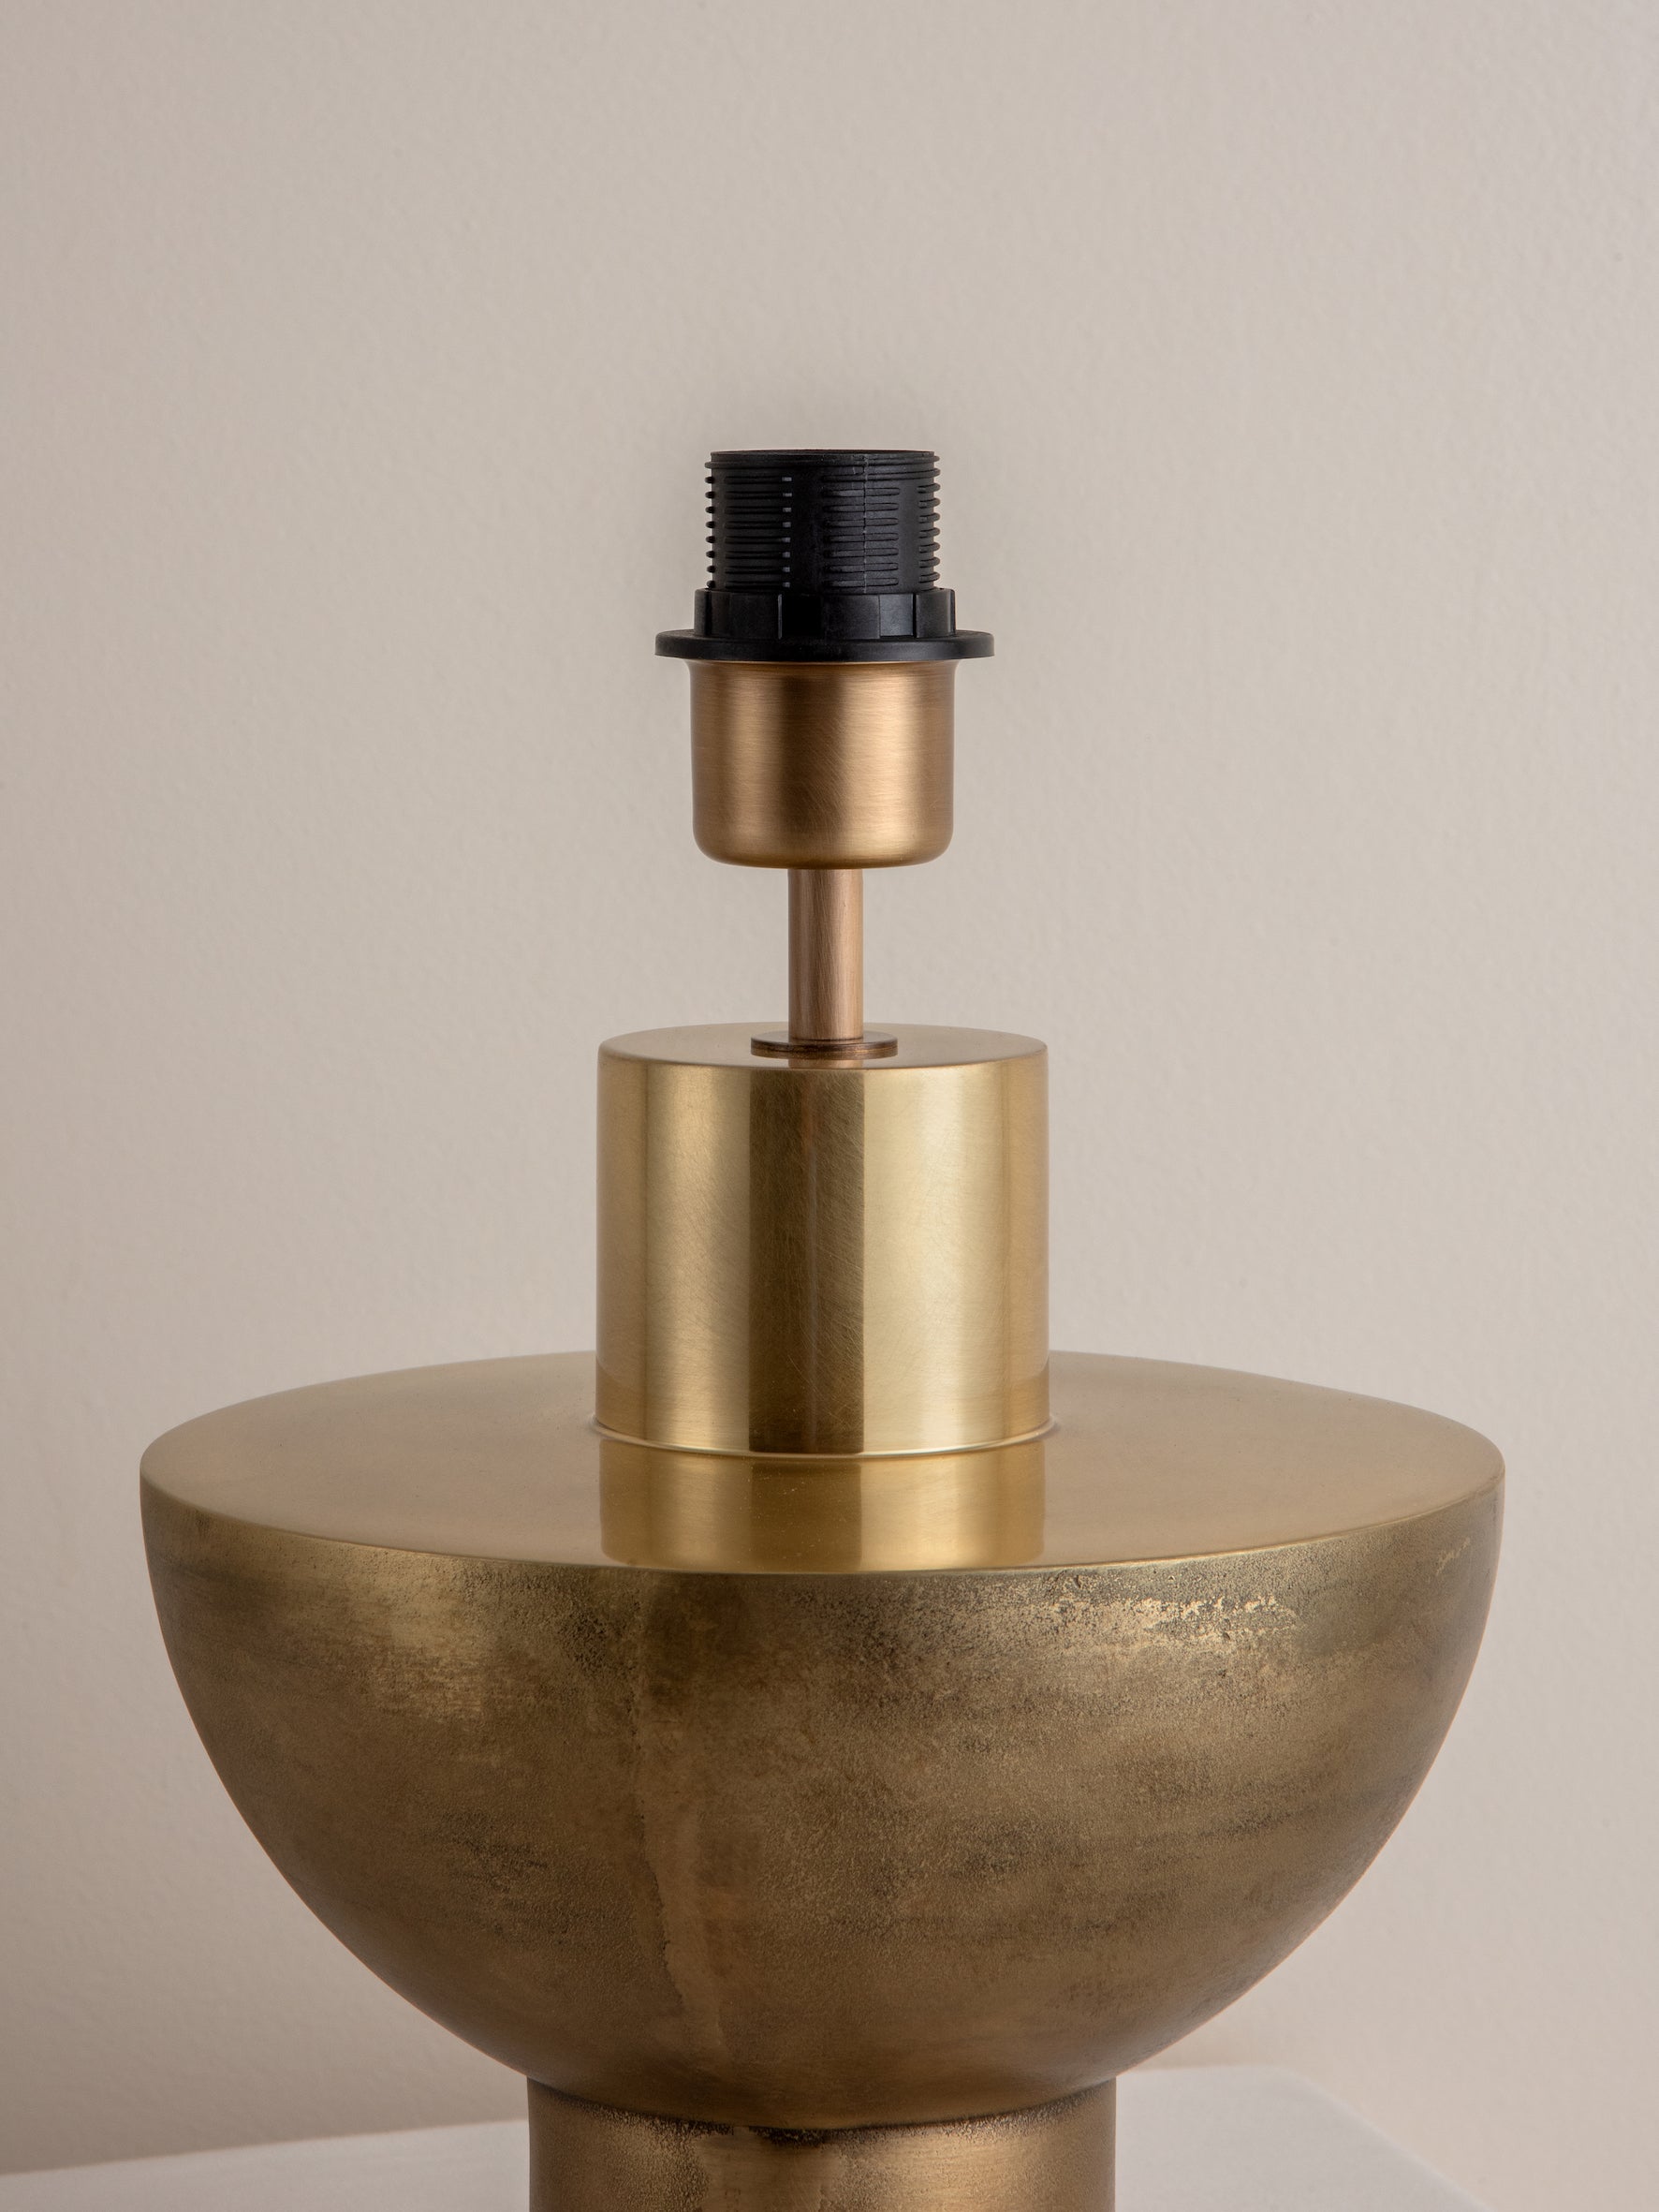 Editions brass lamp with + green lacquer shade, Table Lamp